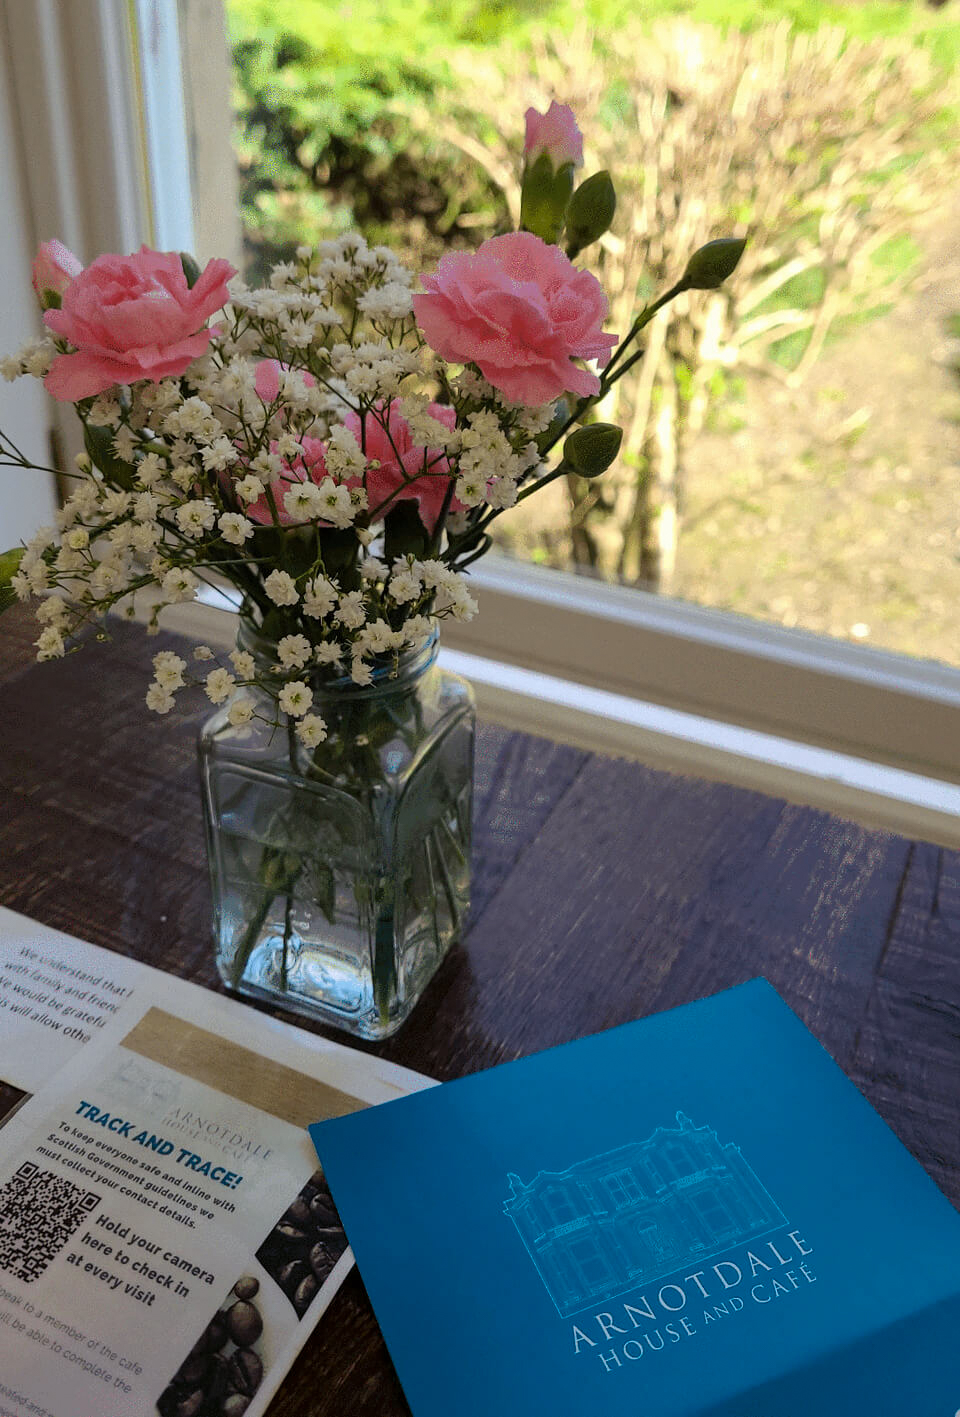 A glass vase with pink and white flowers sat on a table next to a window with greenery outside. On the table is a blue menu for Arnotdale House and Cafe.